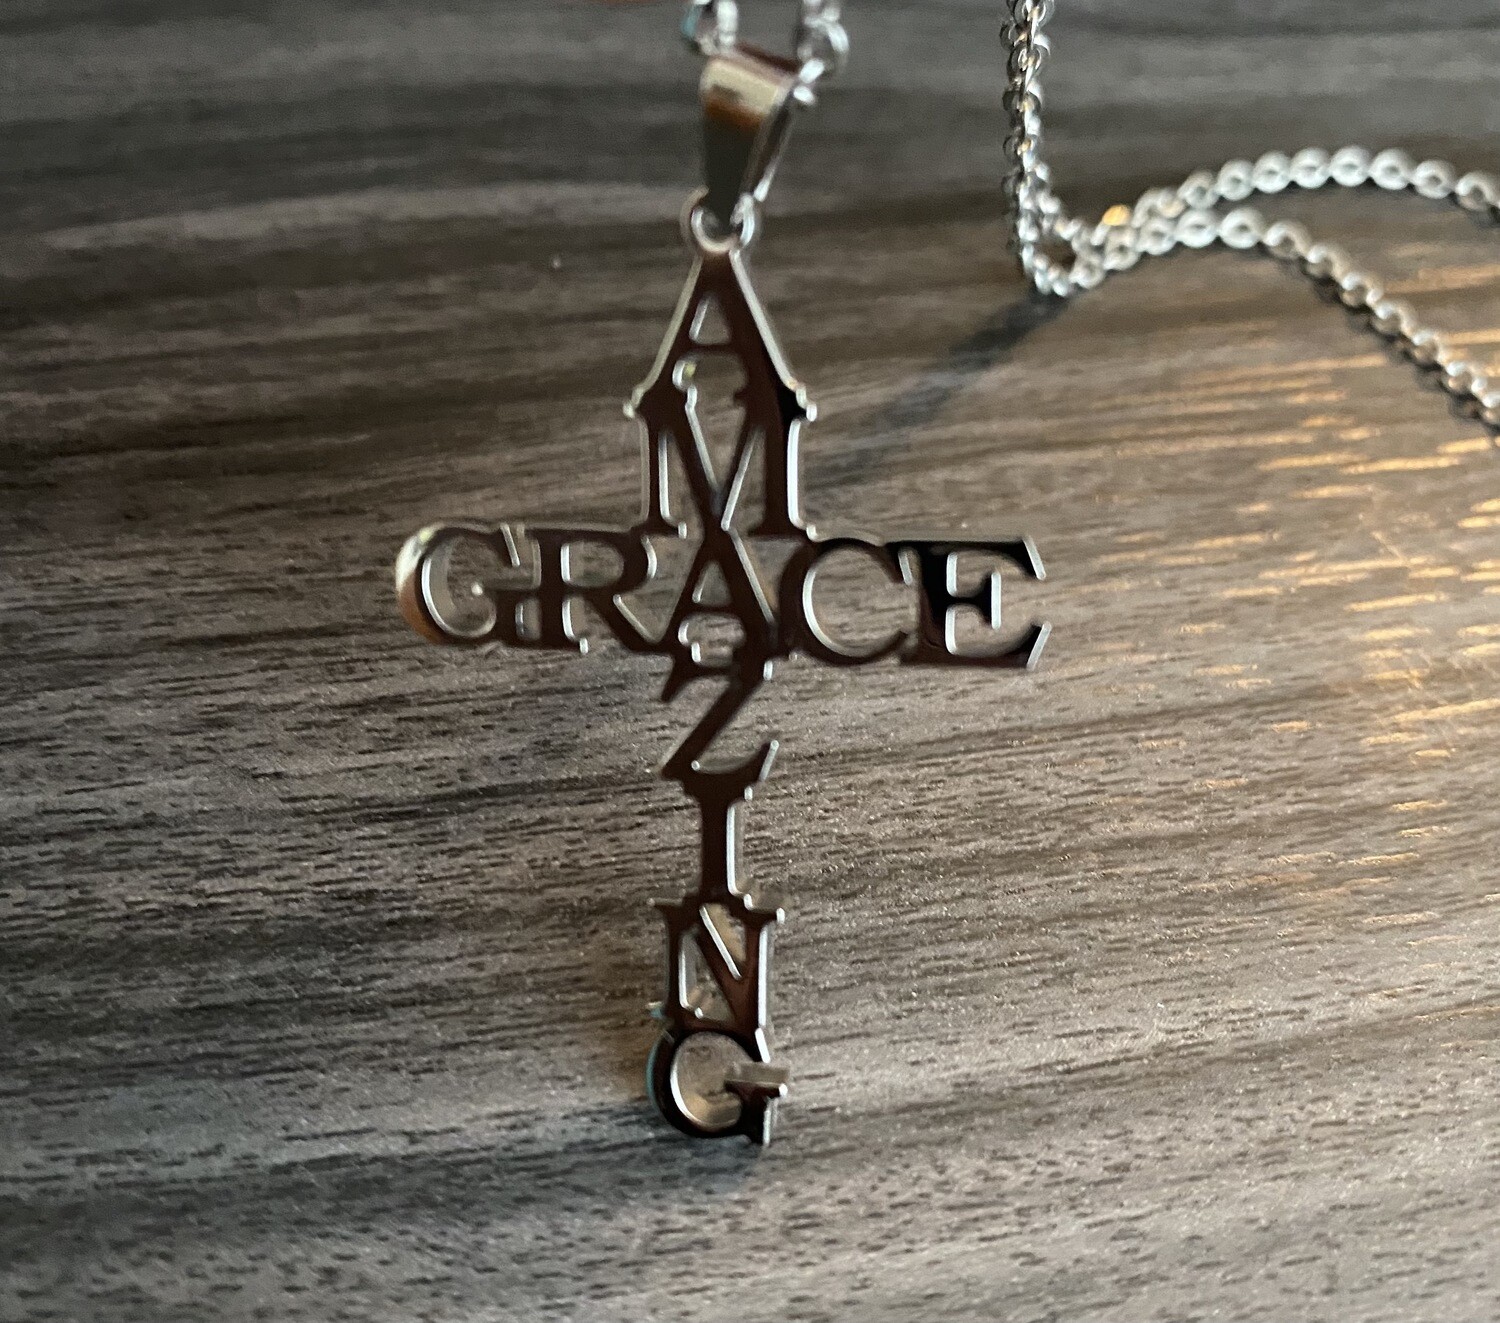 Amazing Grace Necklace | Jewelry| Birthday Gifts| Christmas Gifts | Unique Statement Jewelry
Silver